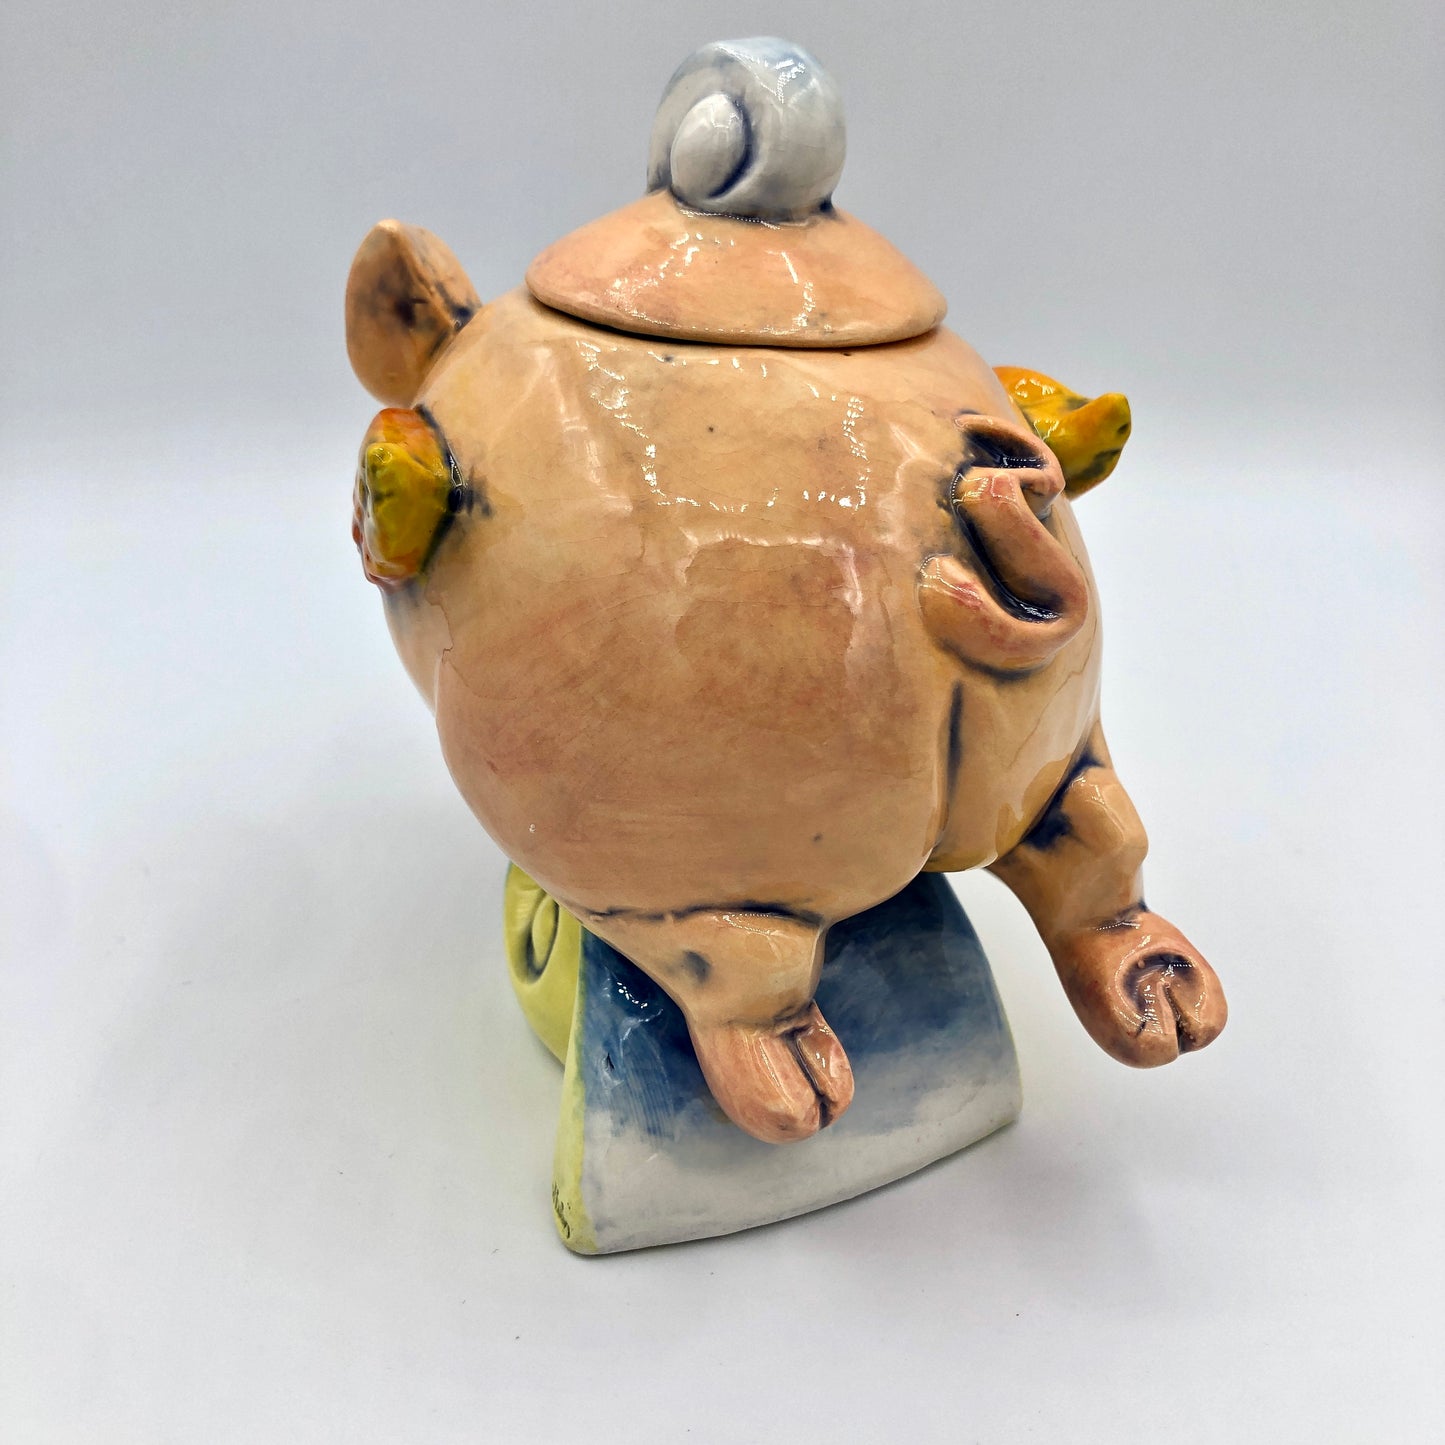 PORCELAIN FLYING PIG HAND PAINTED FIGURINE MINIATURE SCULPTURE LIMITED EDITION by Danisha Sculpture